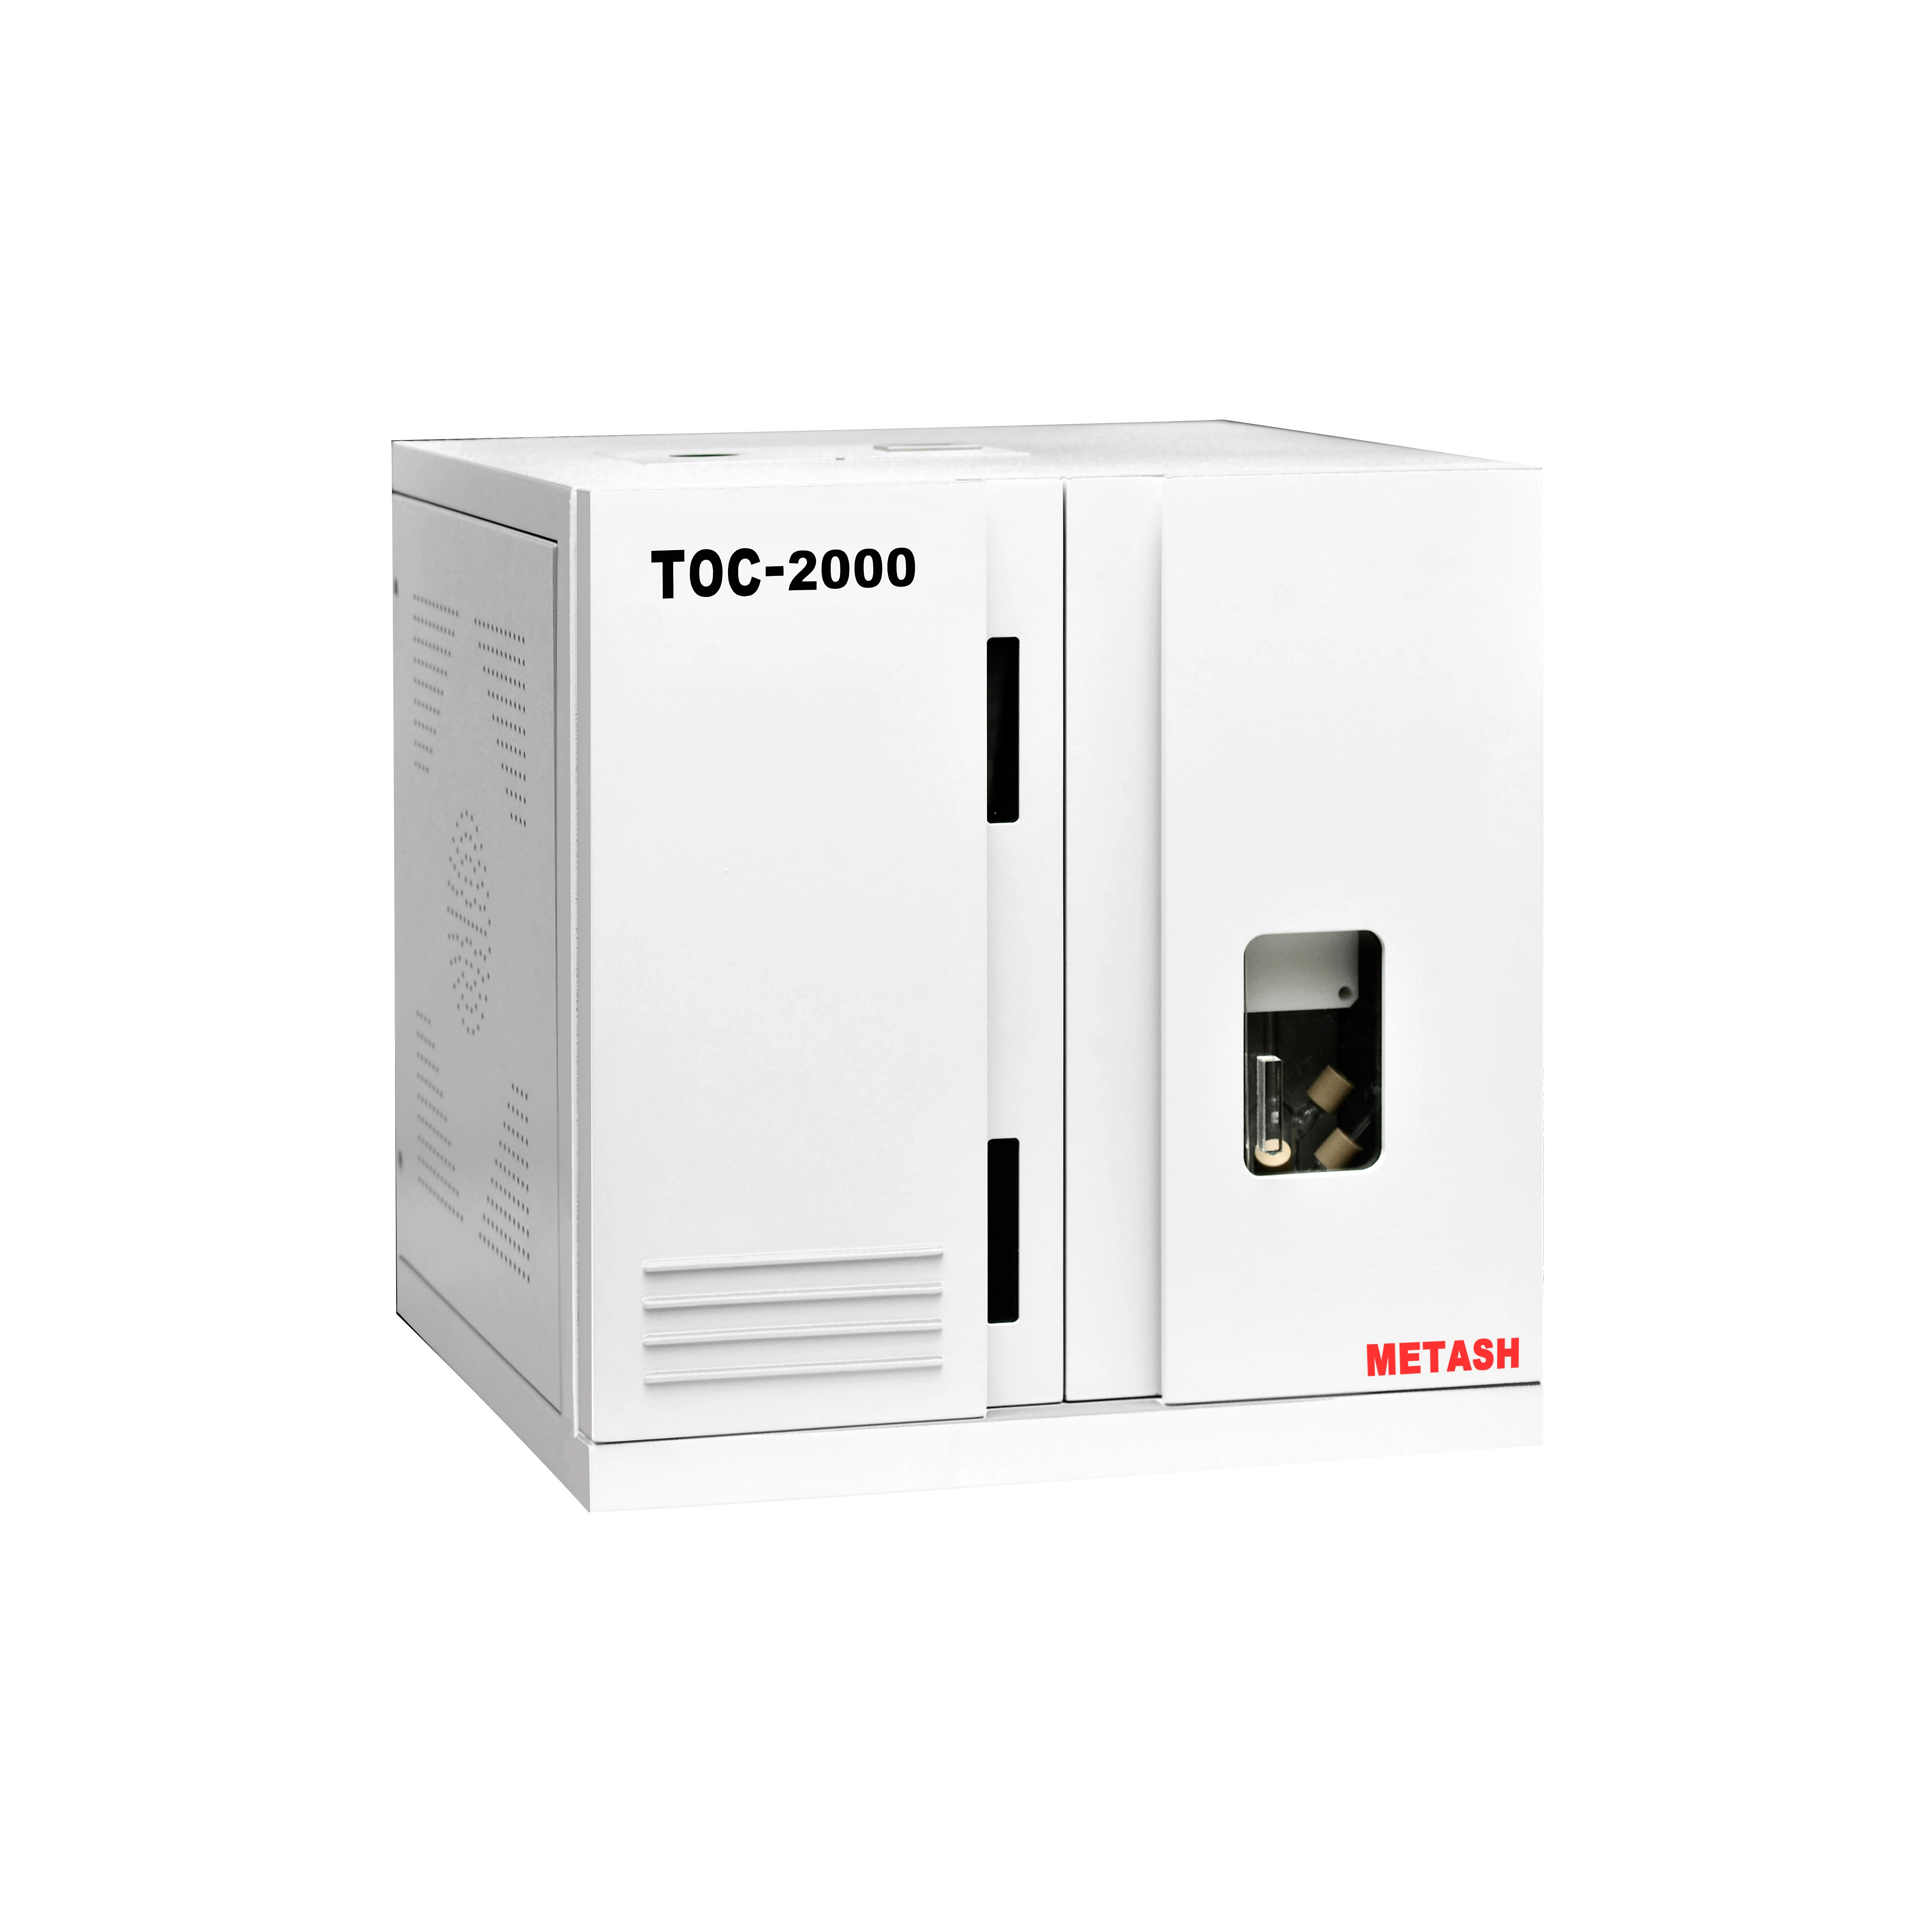 TOC-2000 High Temperature Combustion Total Organic Carbon Analyzer